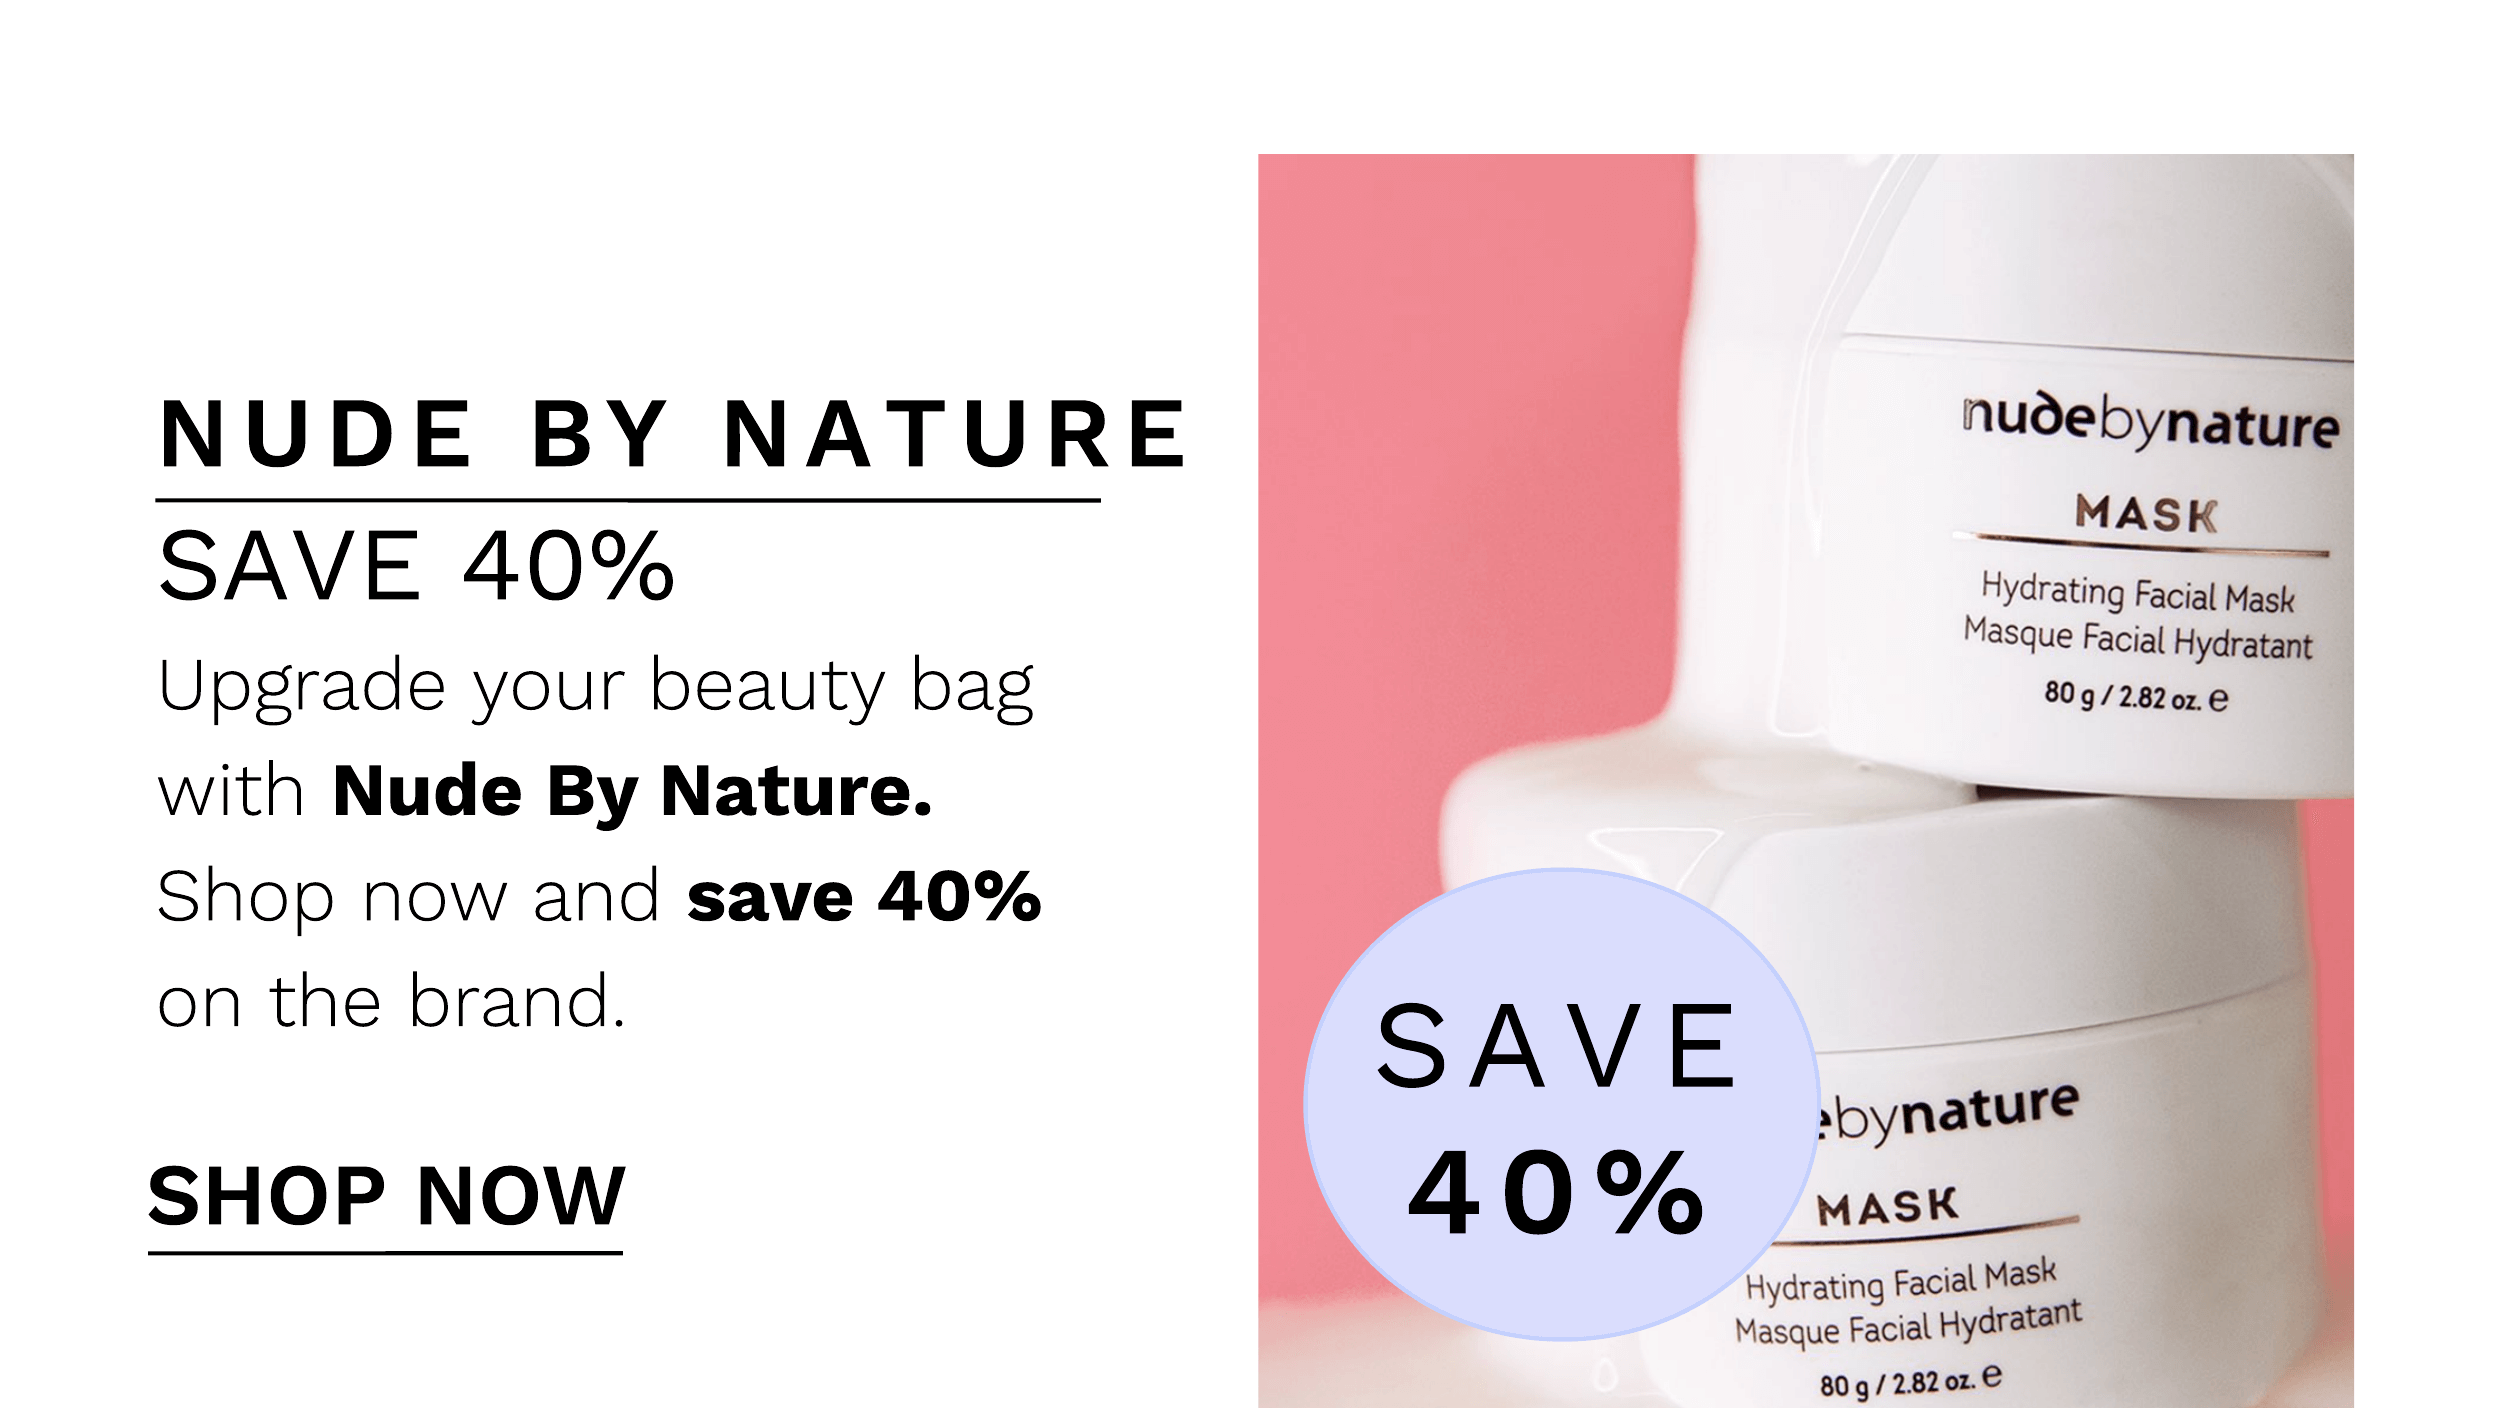 NUDE BY NATURE SAVE 40% Upgrade your beauty bag with Nude By Nature. Shop now and save 40% on the brand. SHOP NOW Hydrating Facial Mask 3 Masque Facial Hydratant 8092820z. SAVE 40% sbynatur MASK Hydrating Facial Mask l Masque Facial H 9 80g28202. 